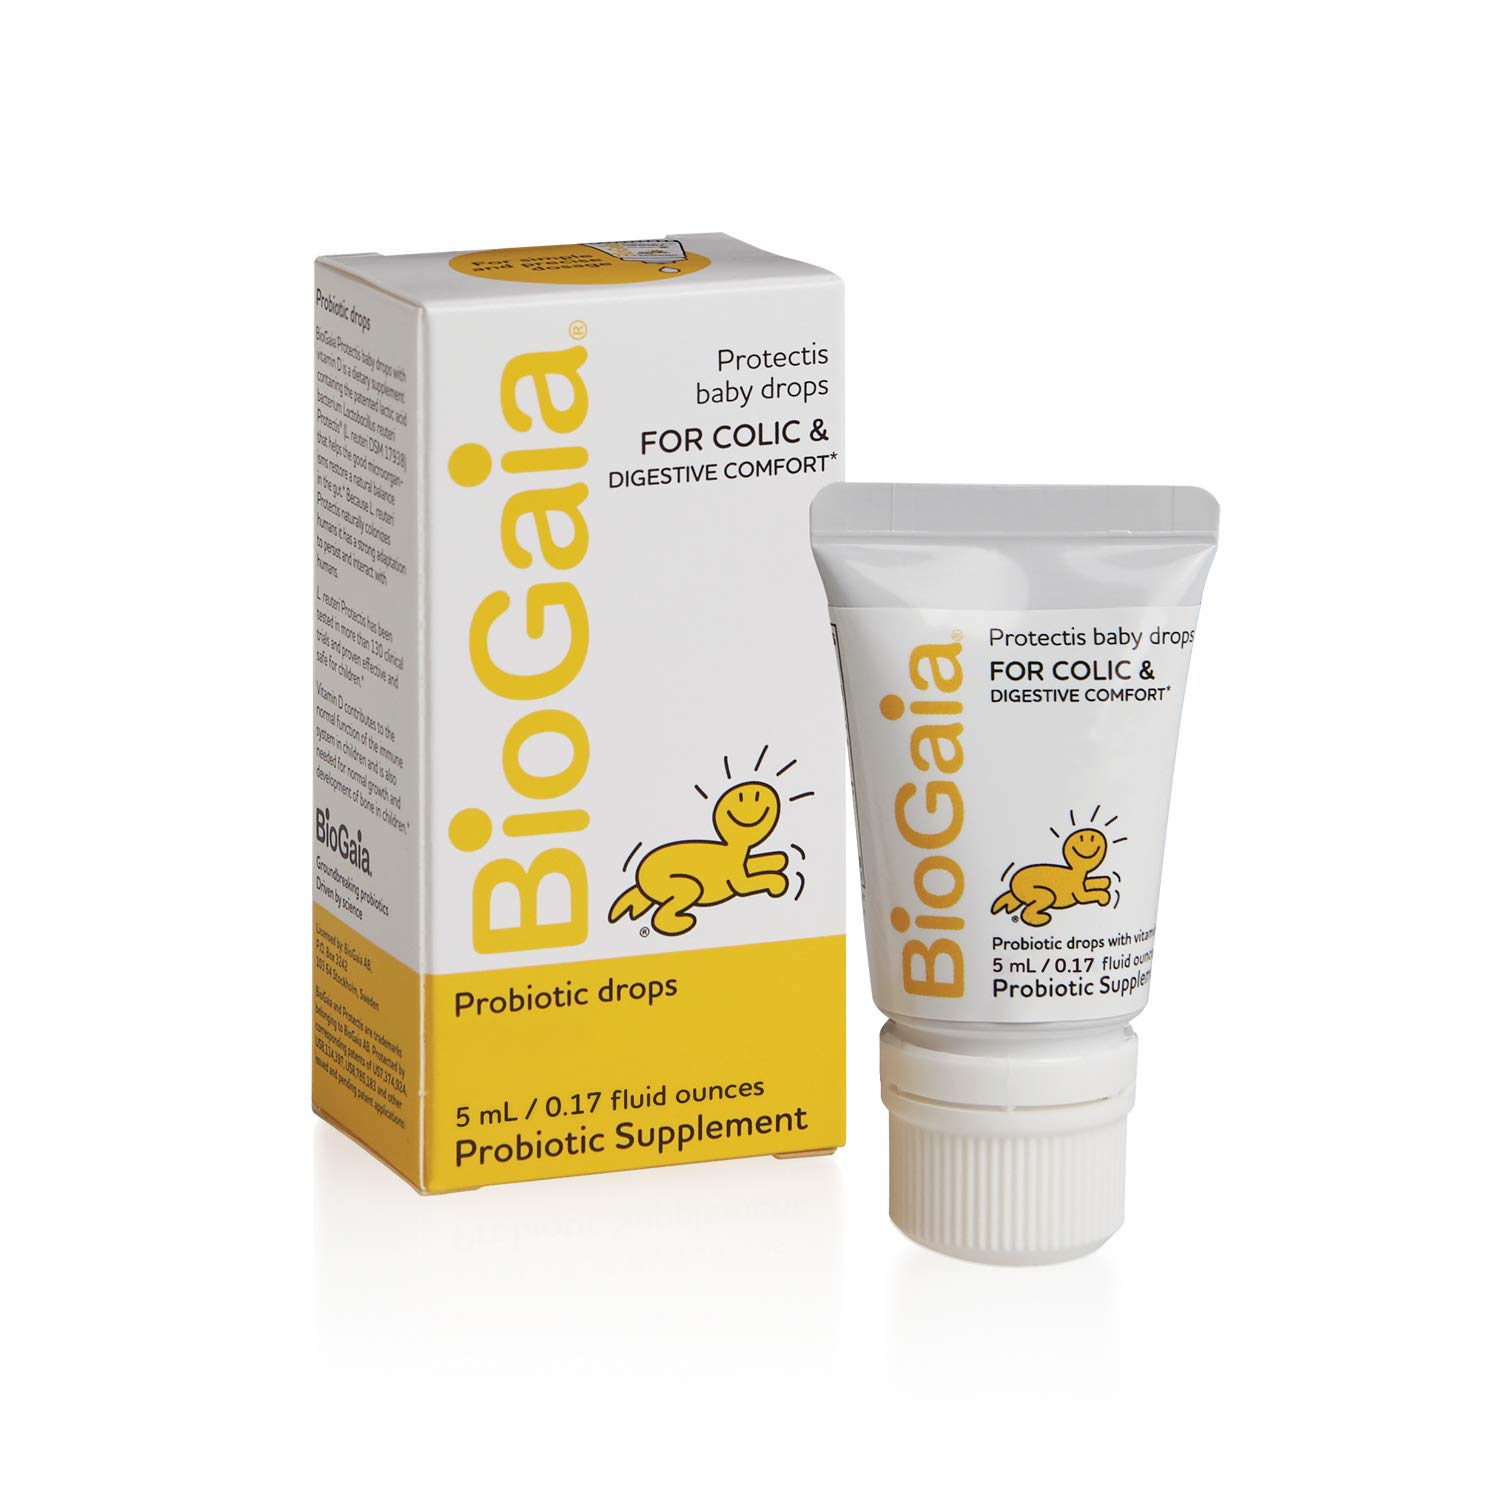 BioGaia Protectis Probiotics Drops for Baby, Infants, Newborn and Kids Colic